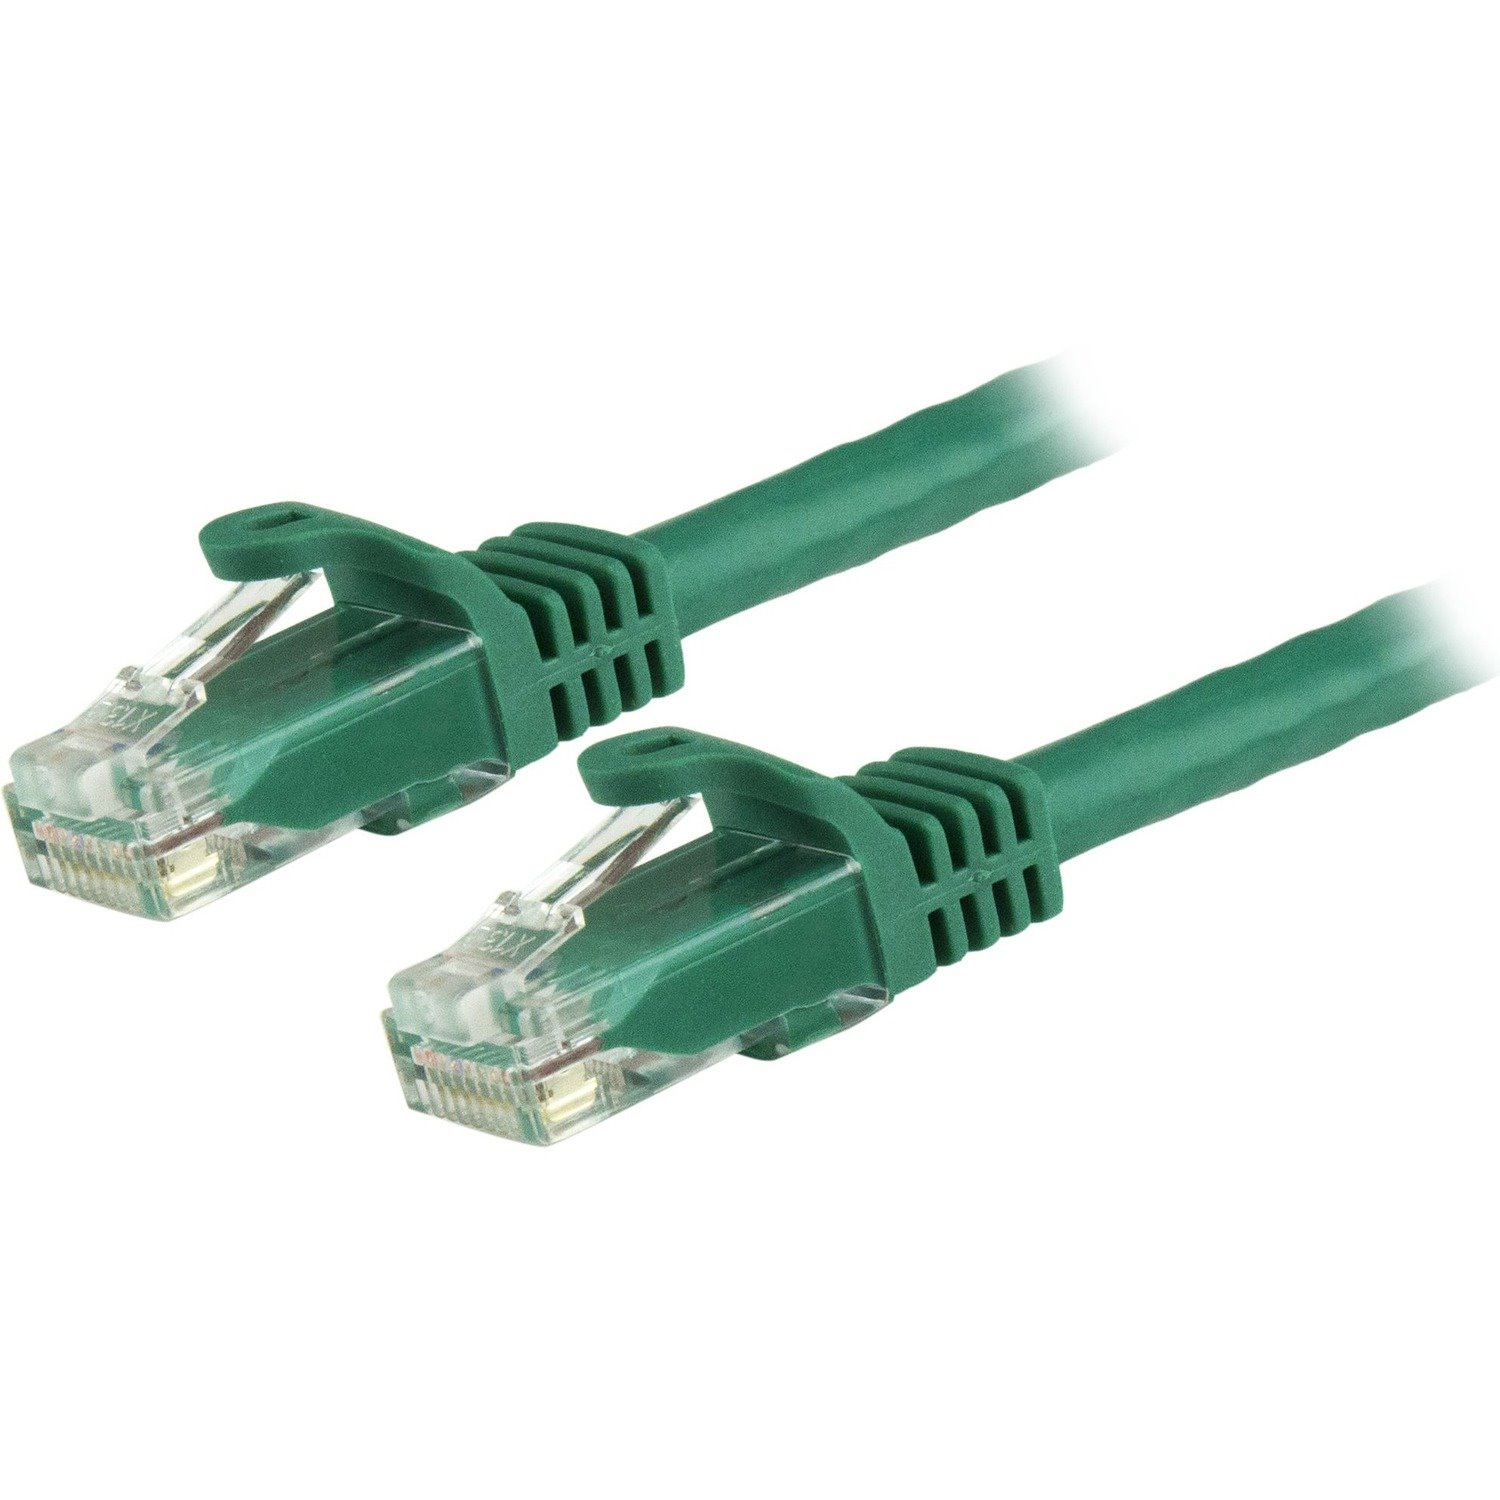 StarTech.com 15 m Category 6 Network Cable for Network Device, Hub, Distribution Panel, Workstation, Wall Outlet, IP Phone - 1